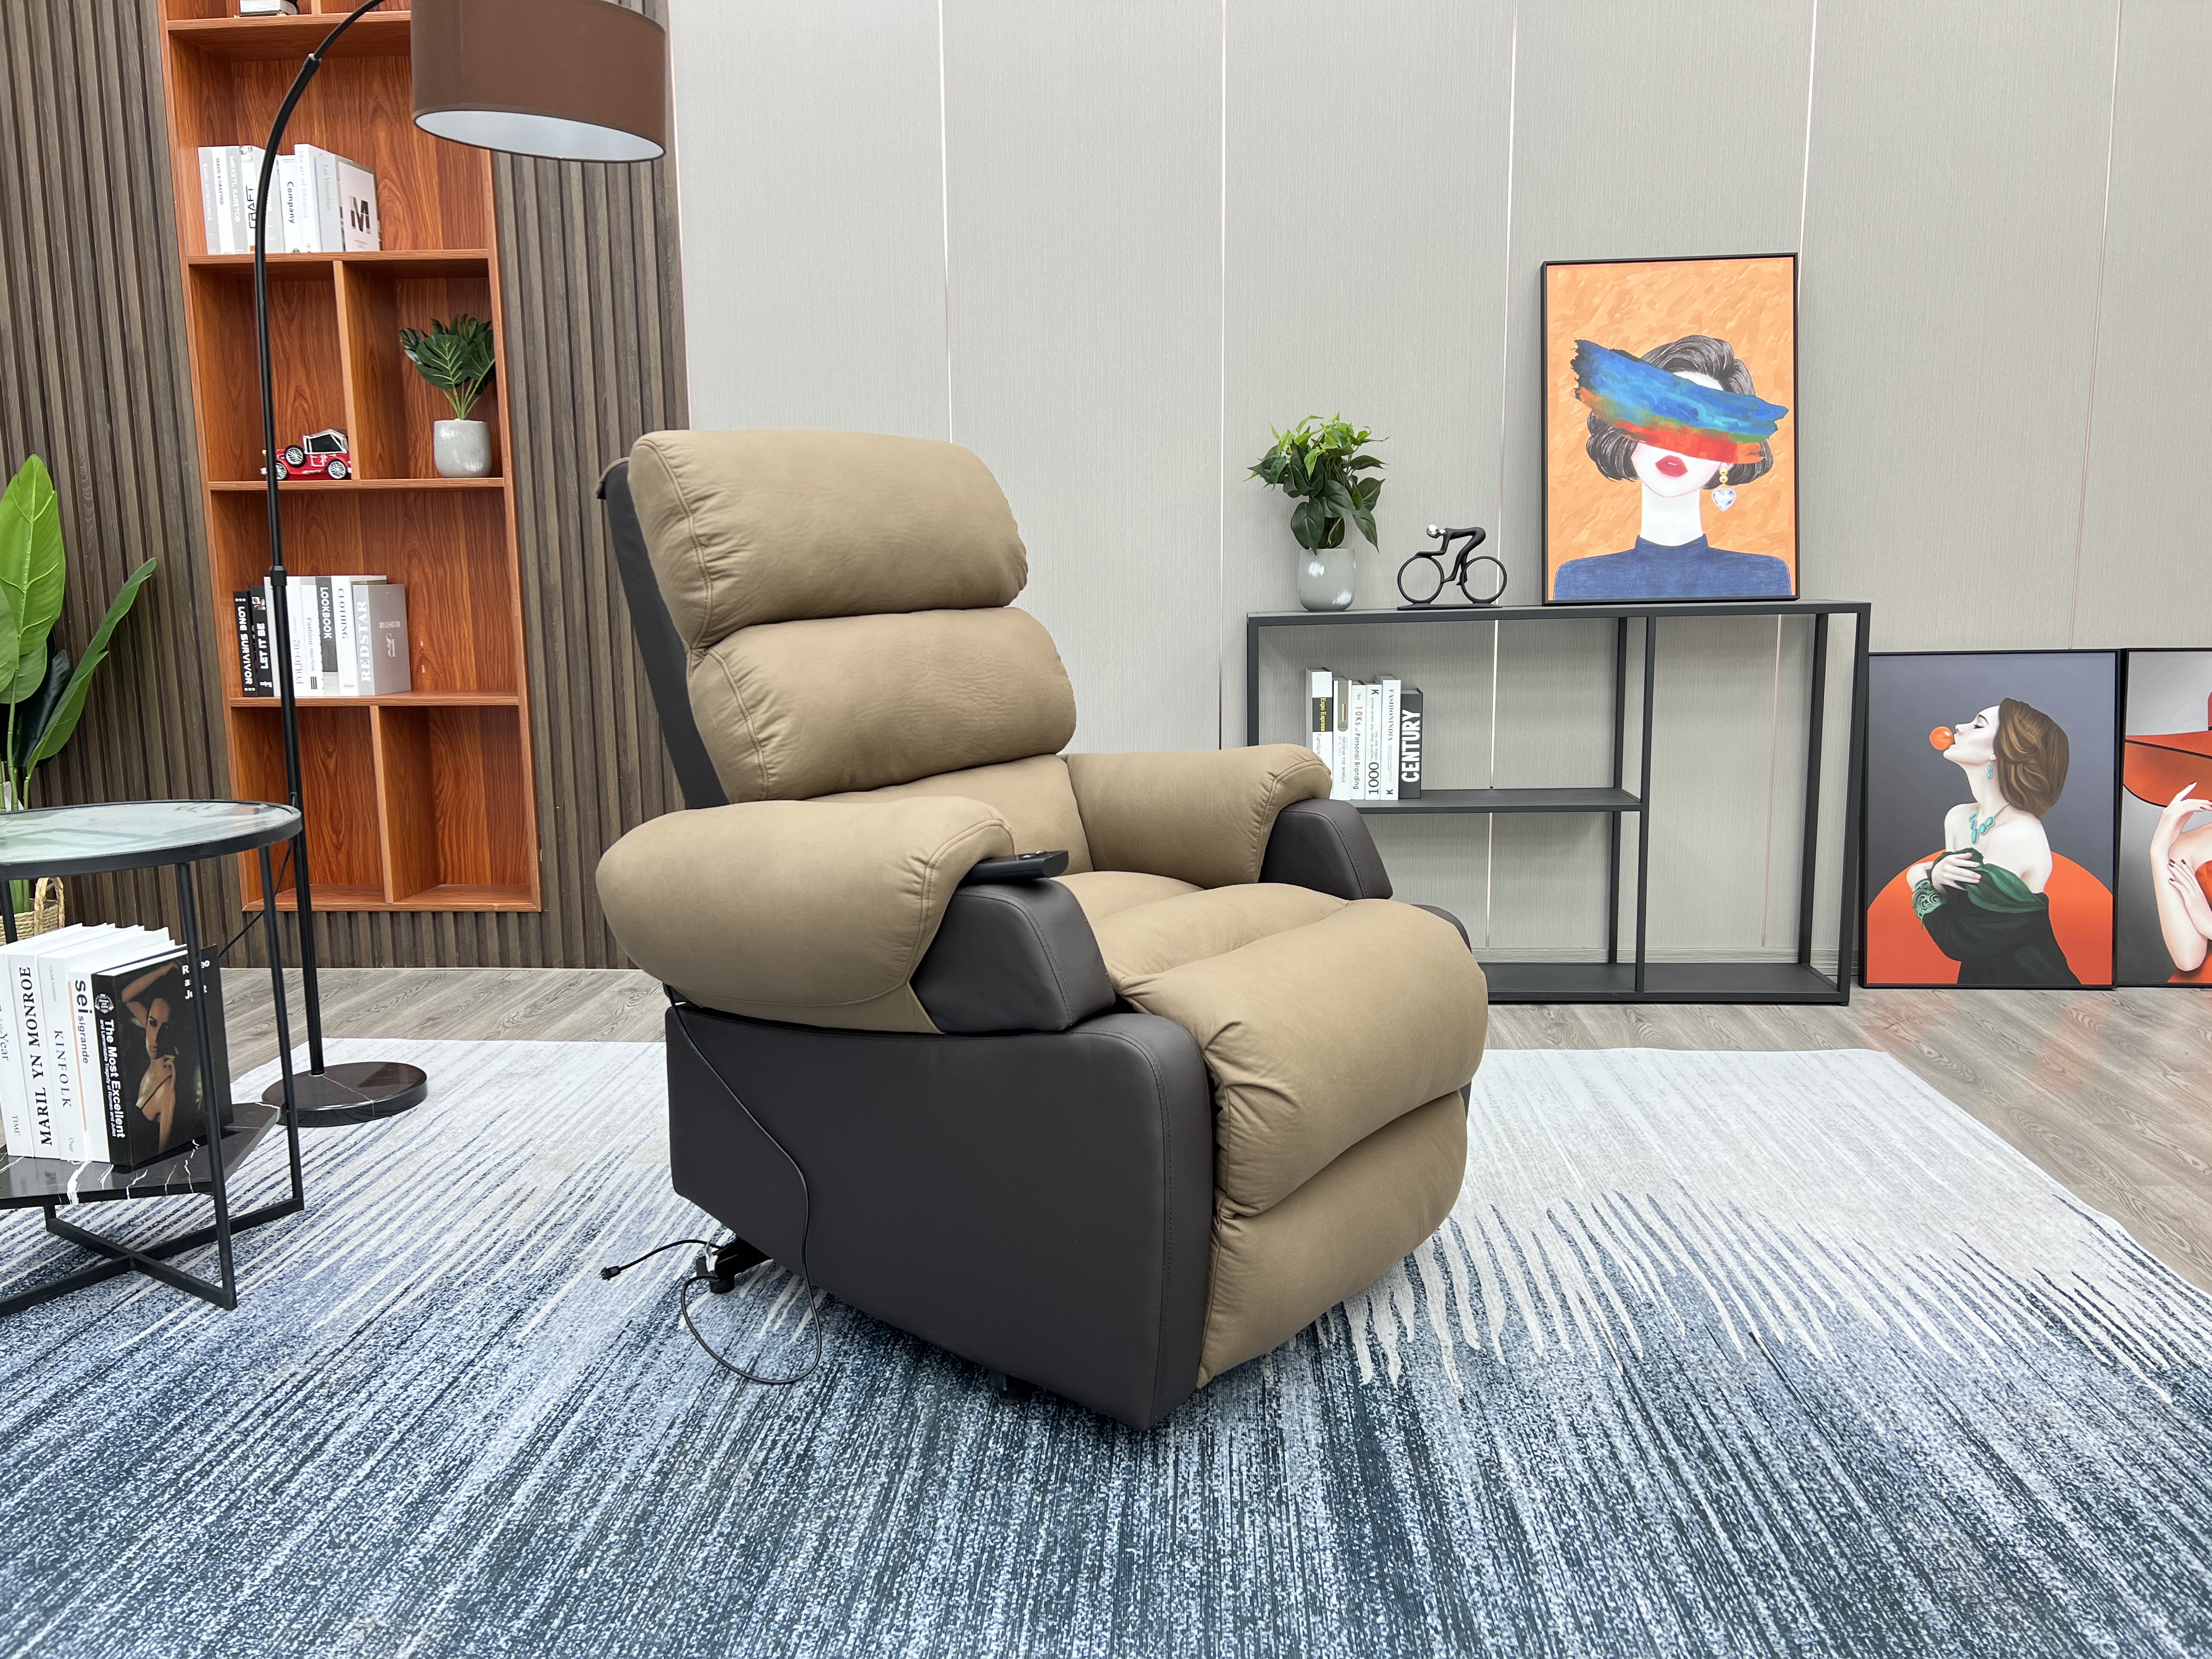 JKY Furniture Modern Electric Lift Chair-How To Help The Elderly?